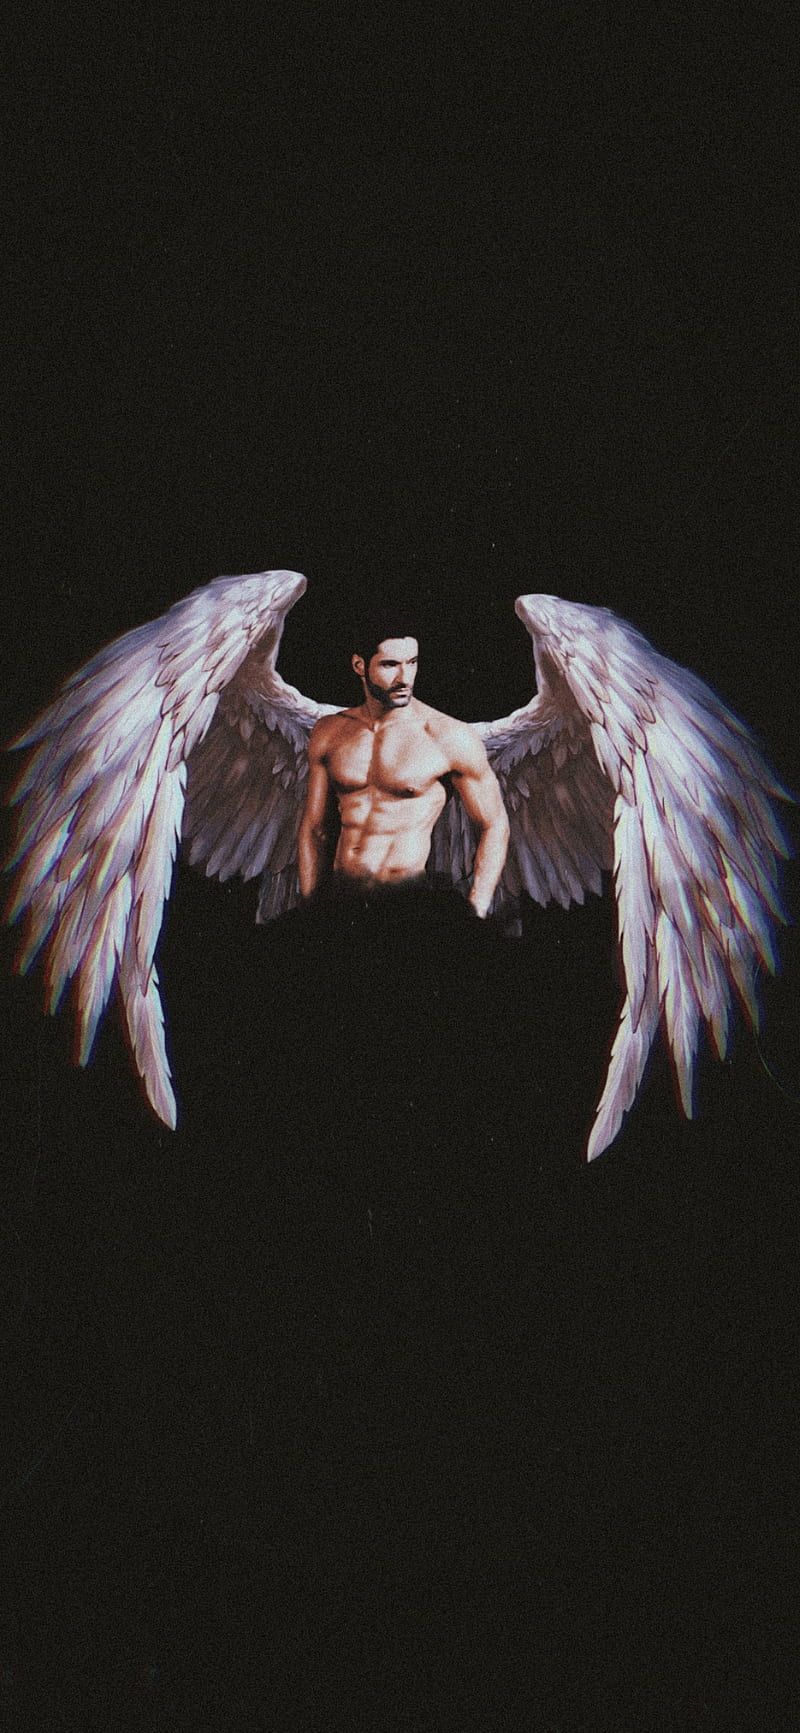 An image of a shirtless man with white wings. - Wings